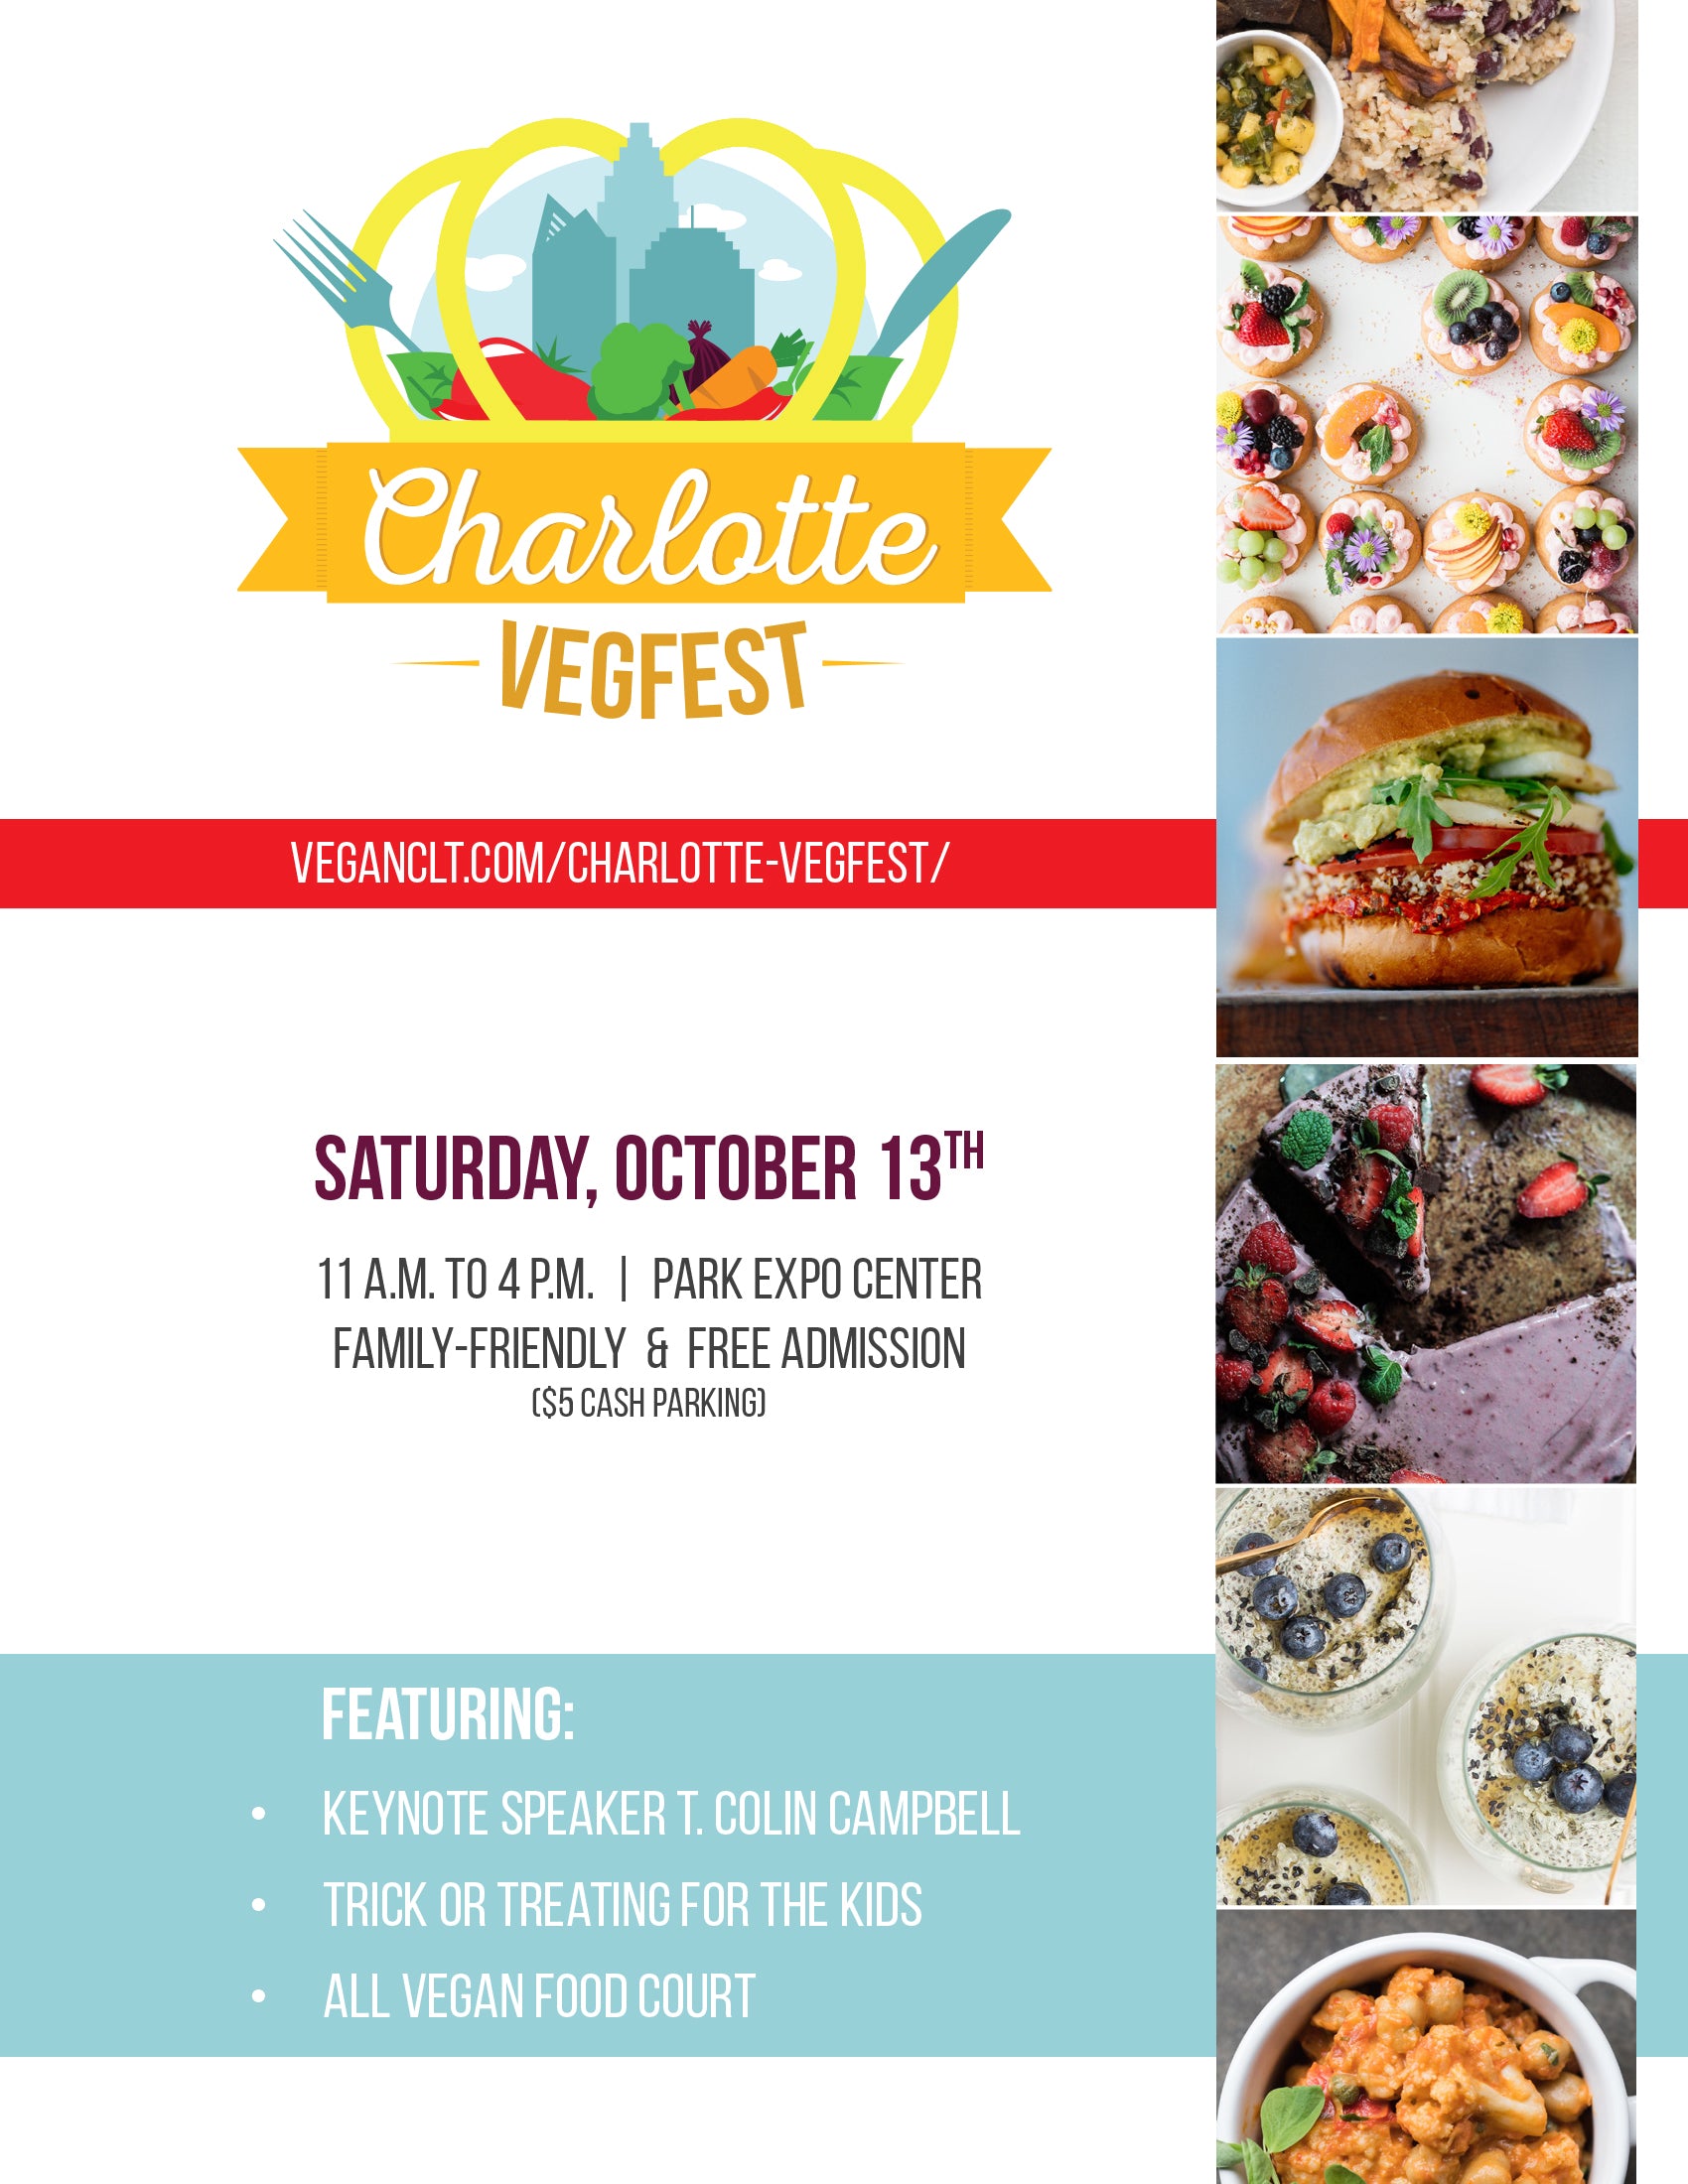 Charlotte Vegfest 2018 was a smashing success! Read on for some of our favorite moments...